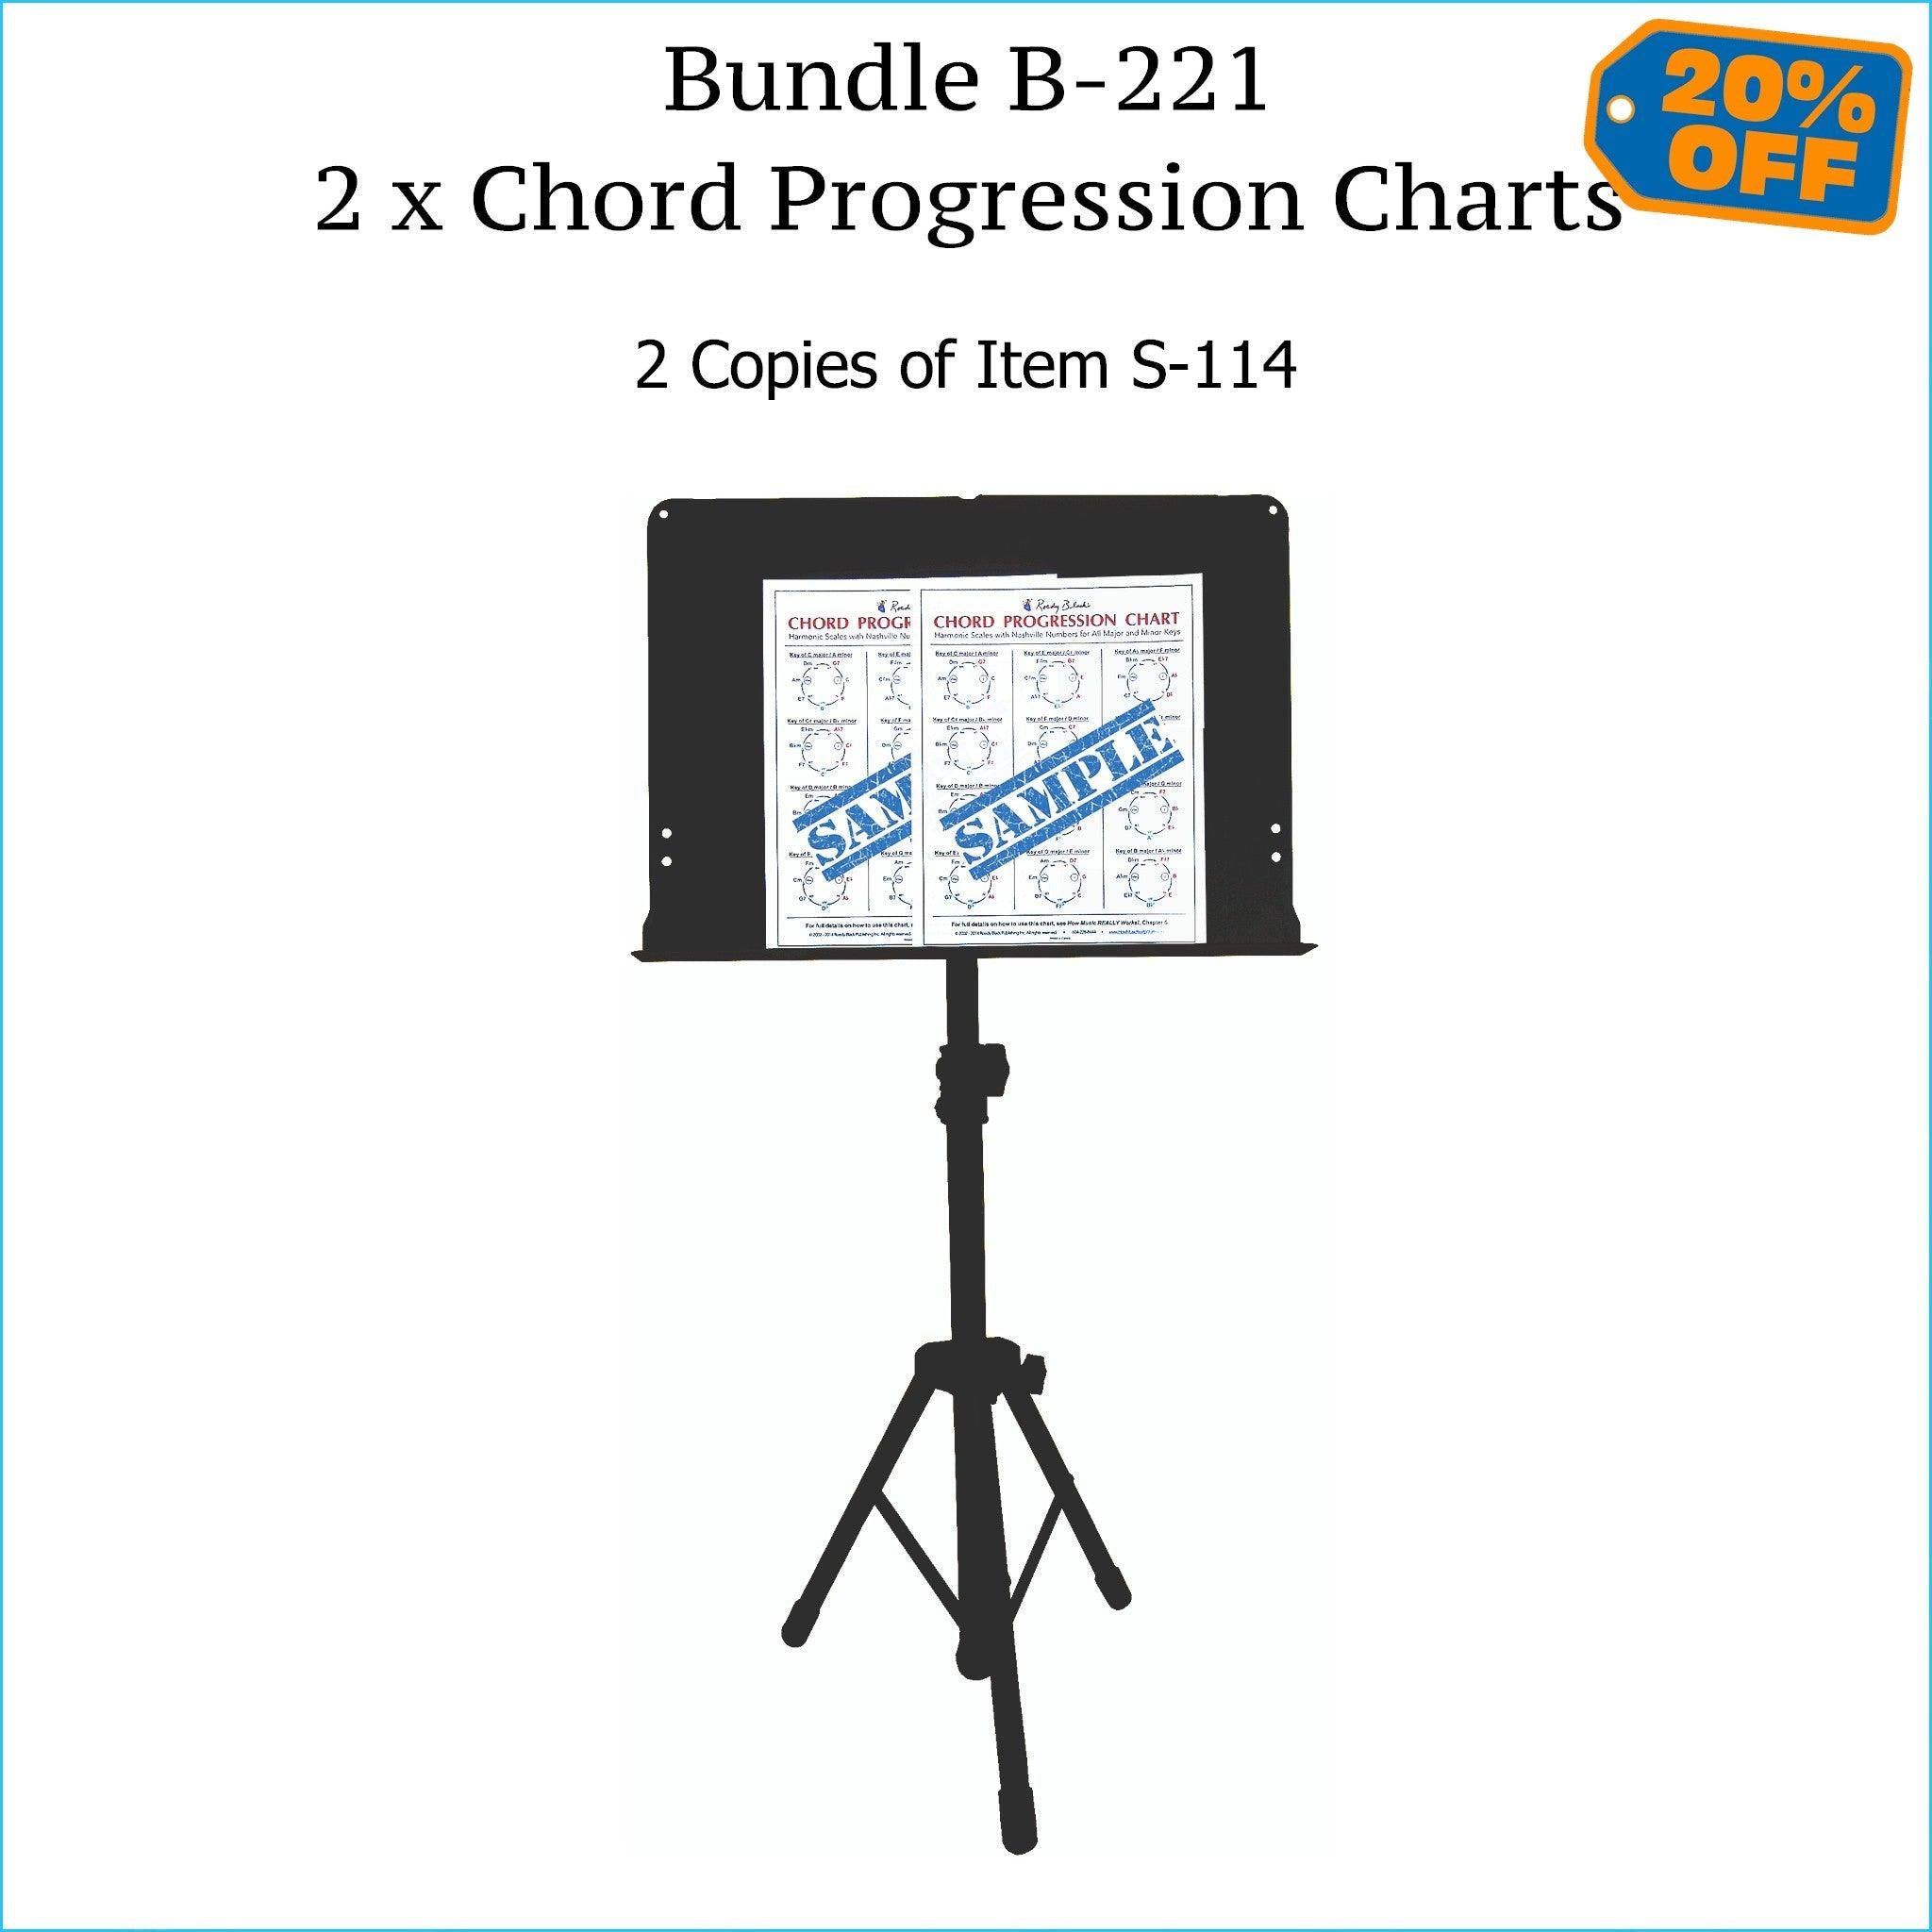 Two chord progression charts, music stand size.